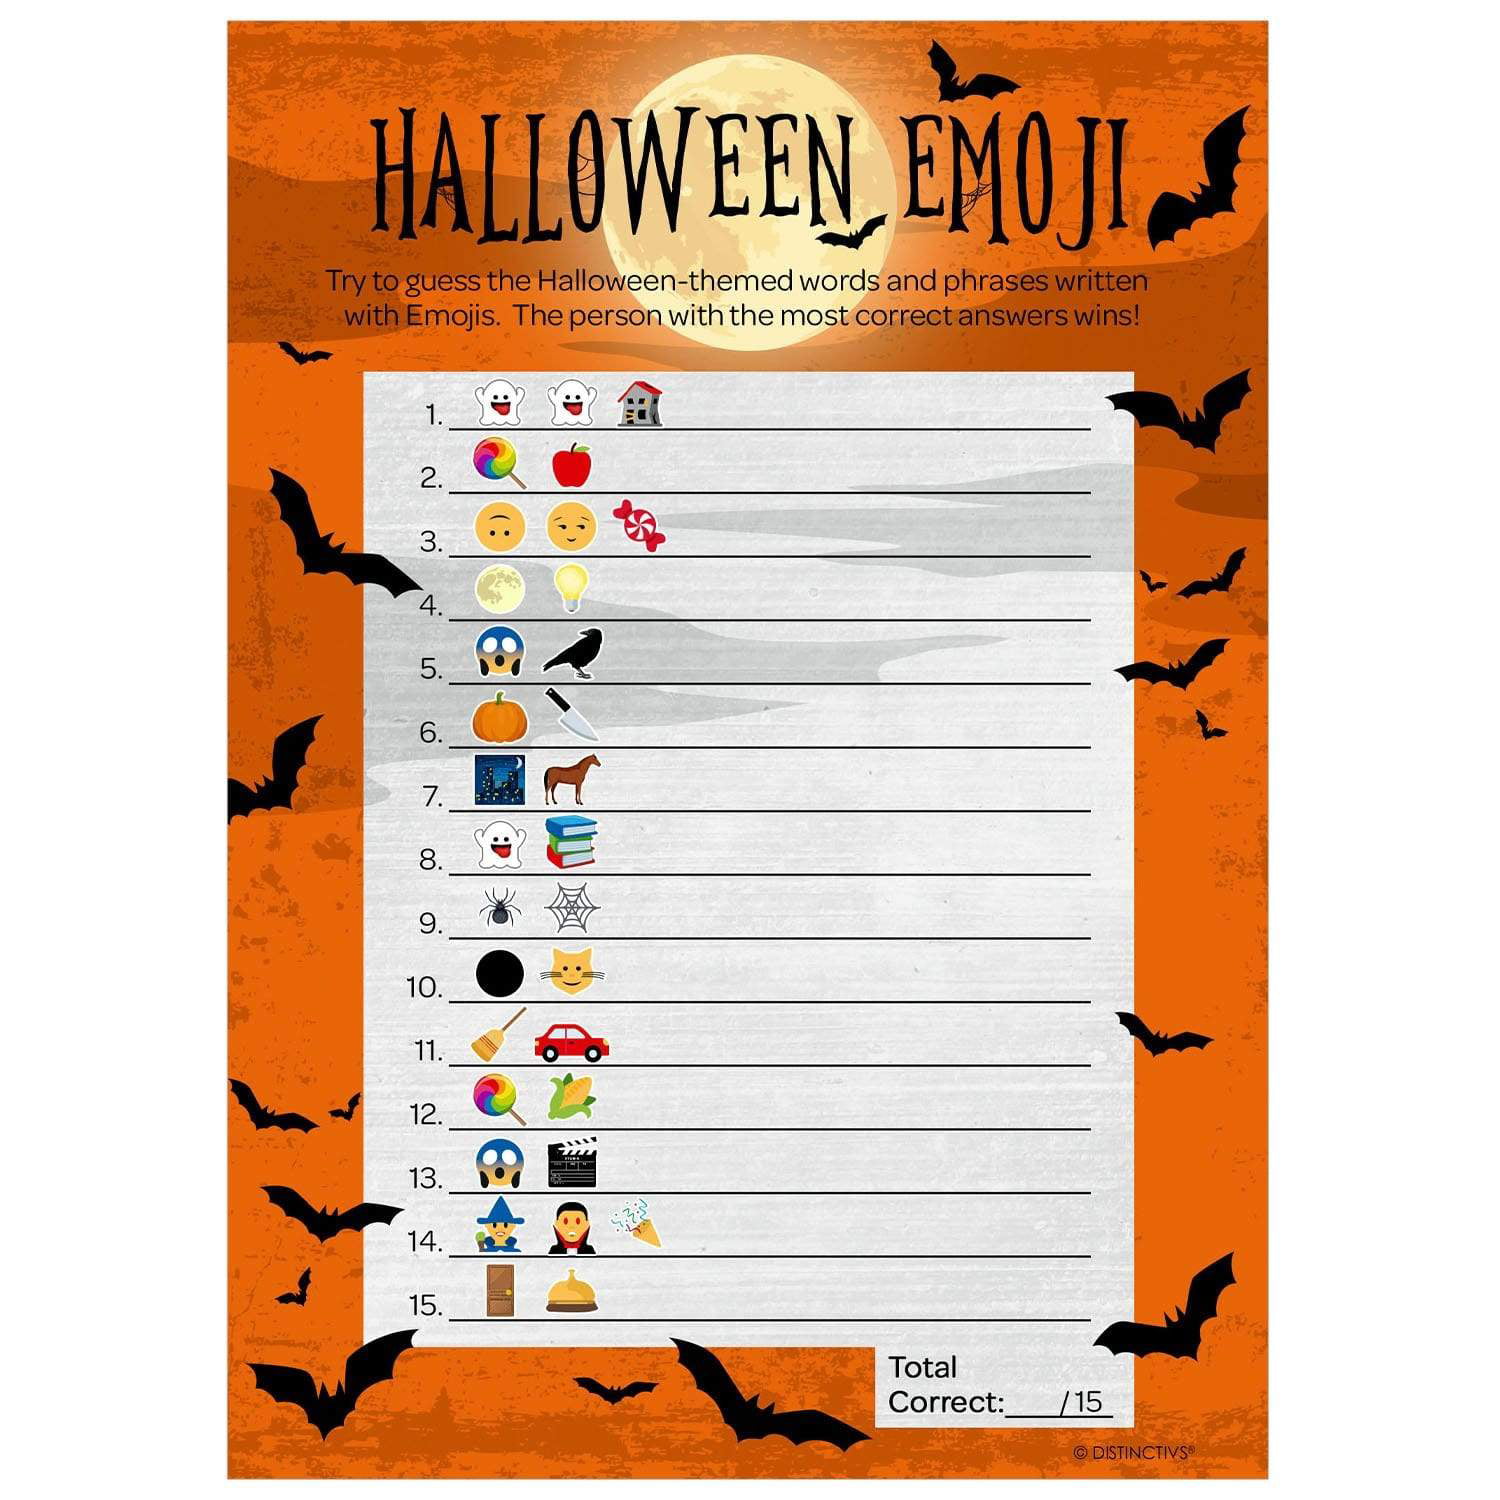 Halloween Emoji Party Game - Guess the Halloween Item from Pictures 25 - Distinctivs Walmart.com